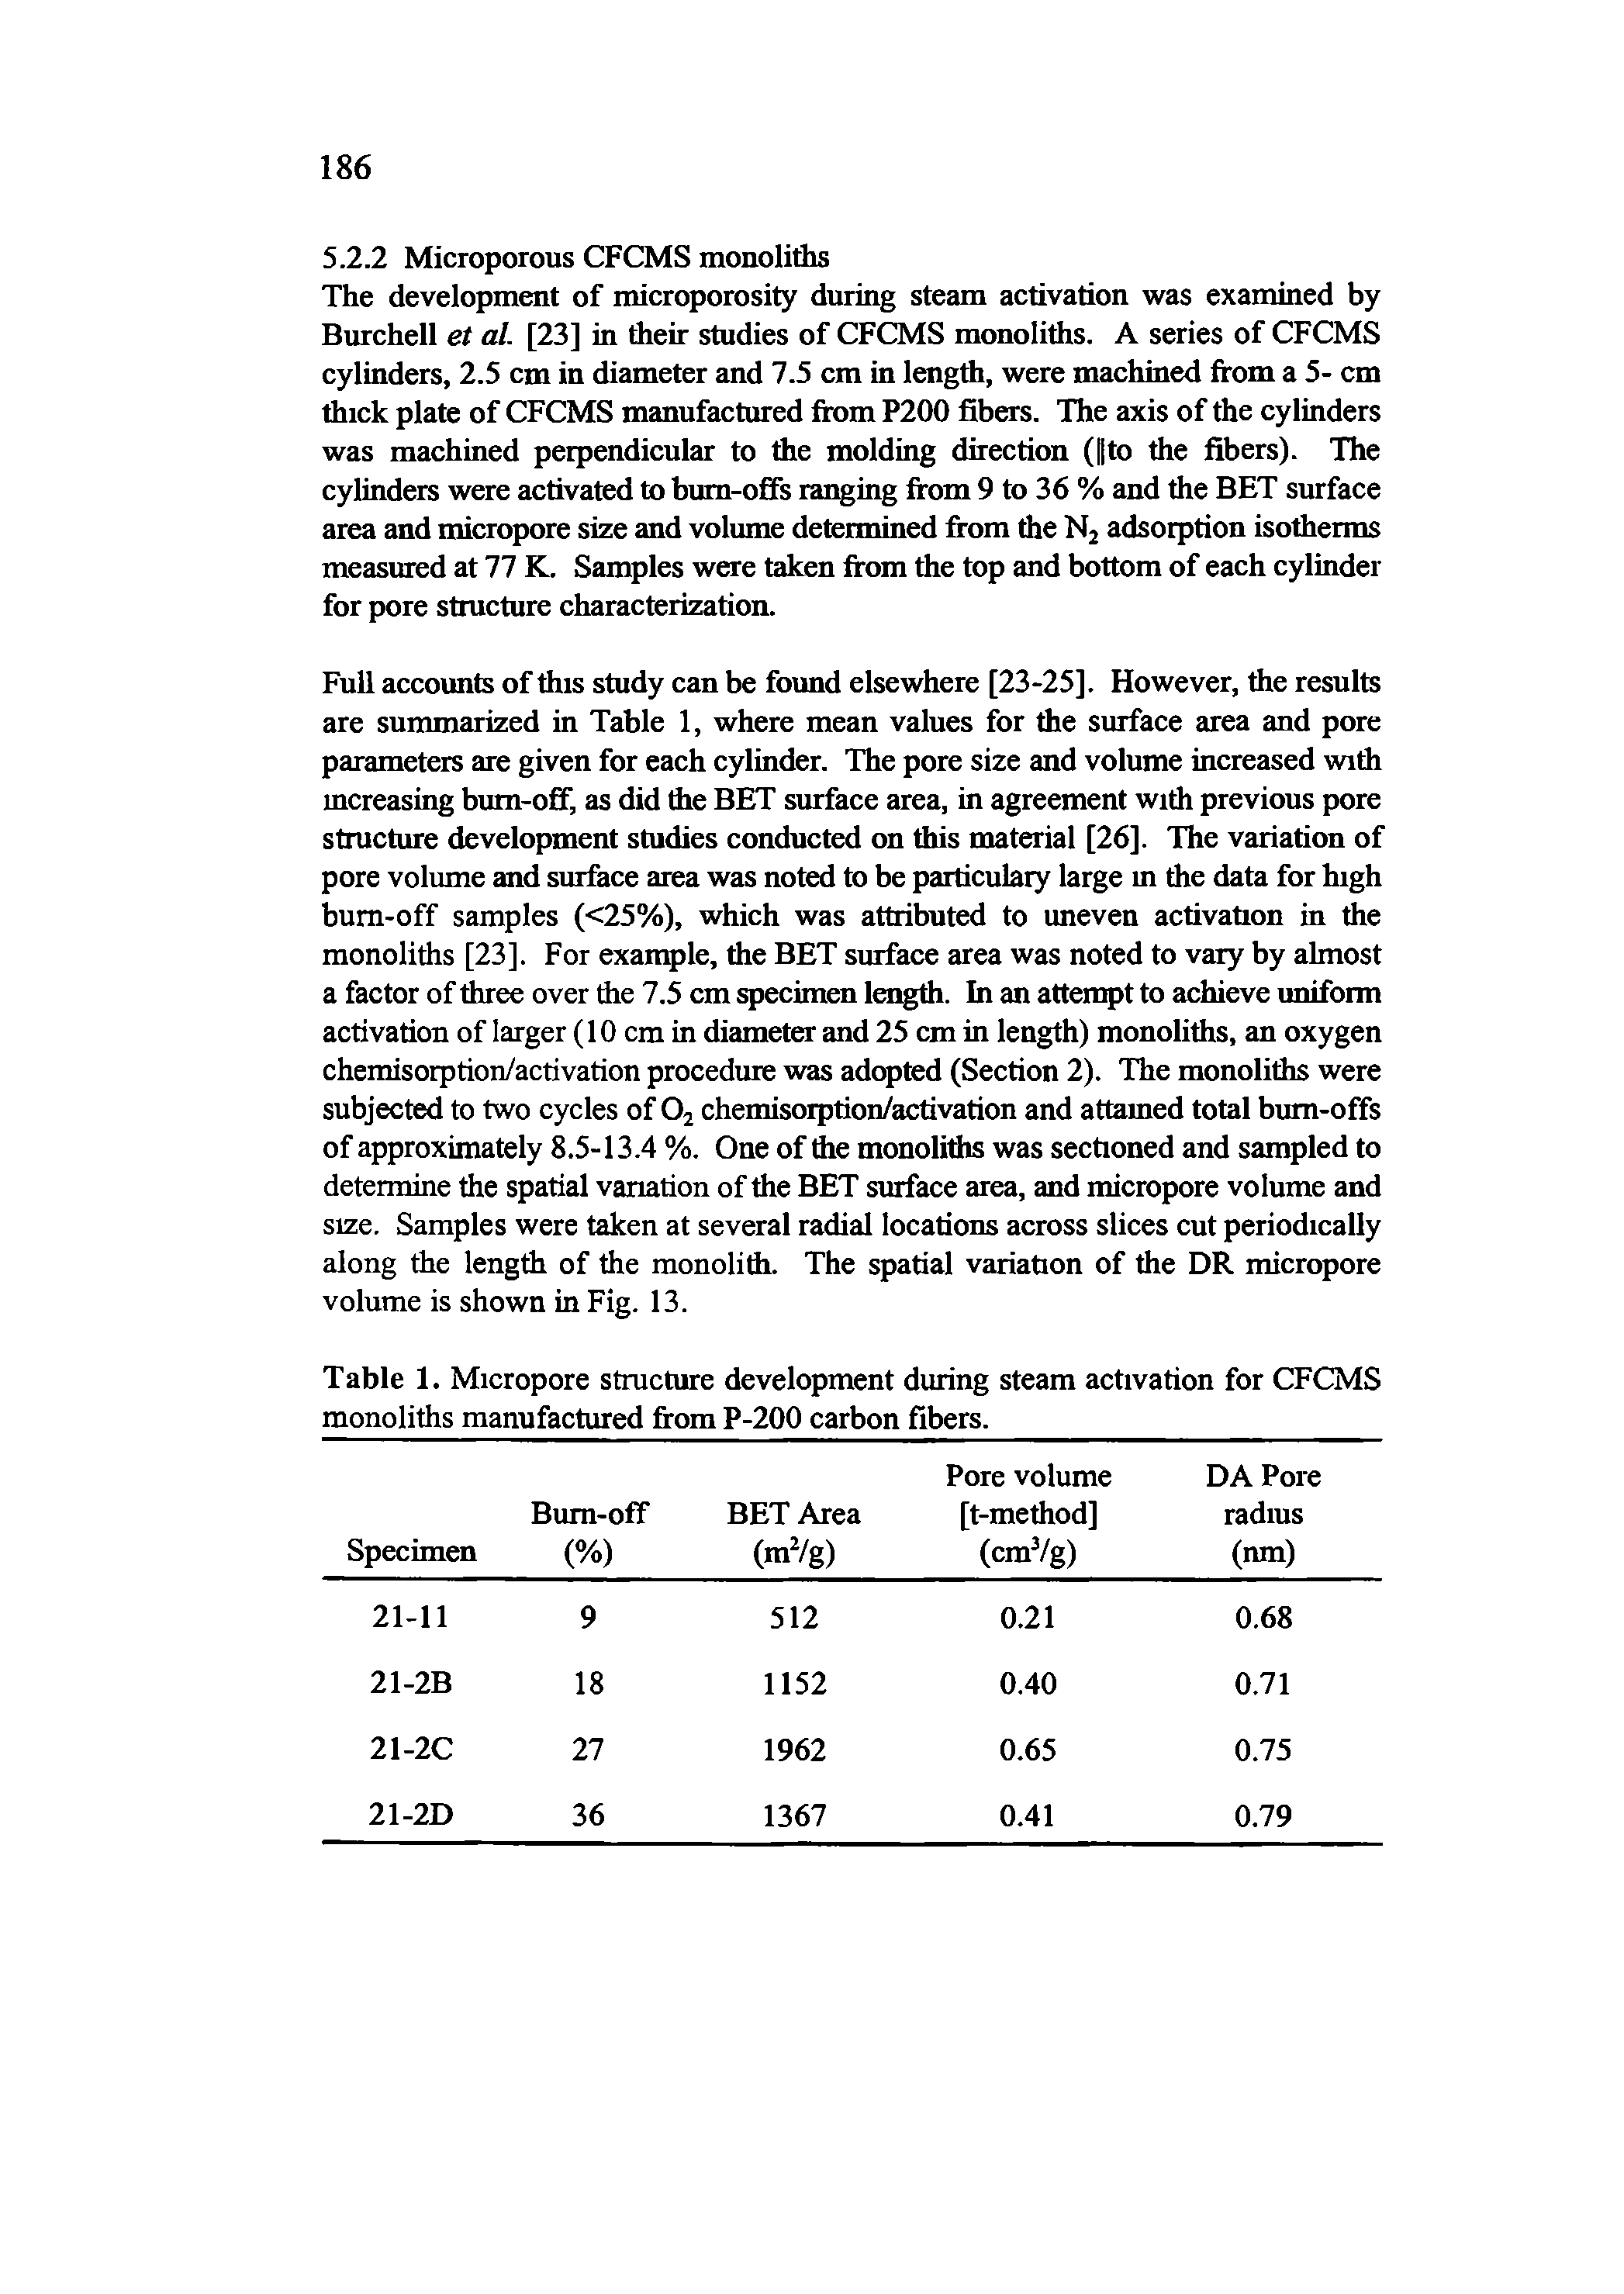 Table 1. Micropore structure development during steam activation for CFCMS monoliths manufactured from P-200 carbon fibers.